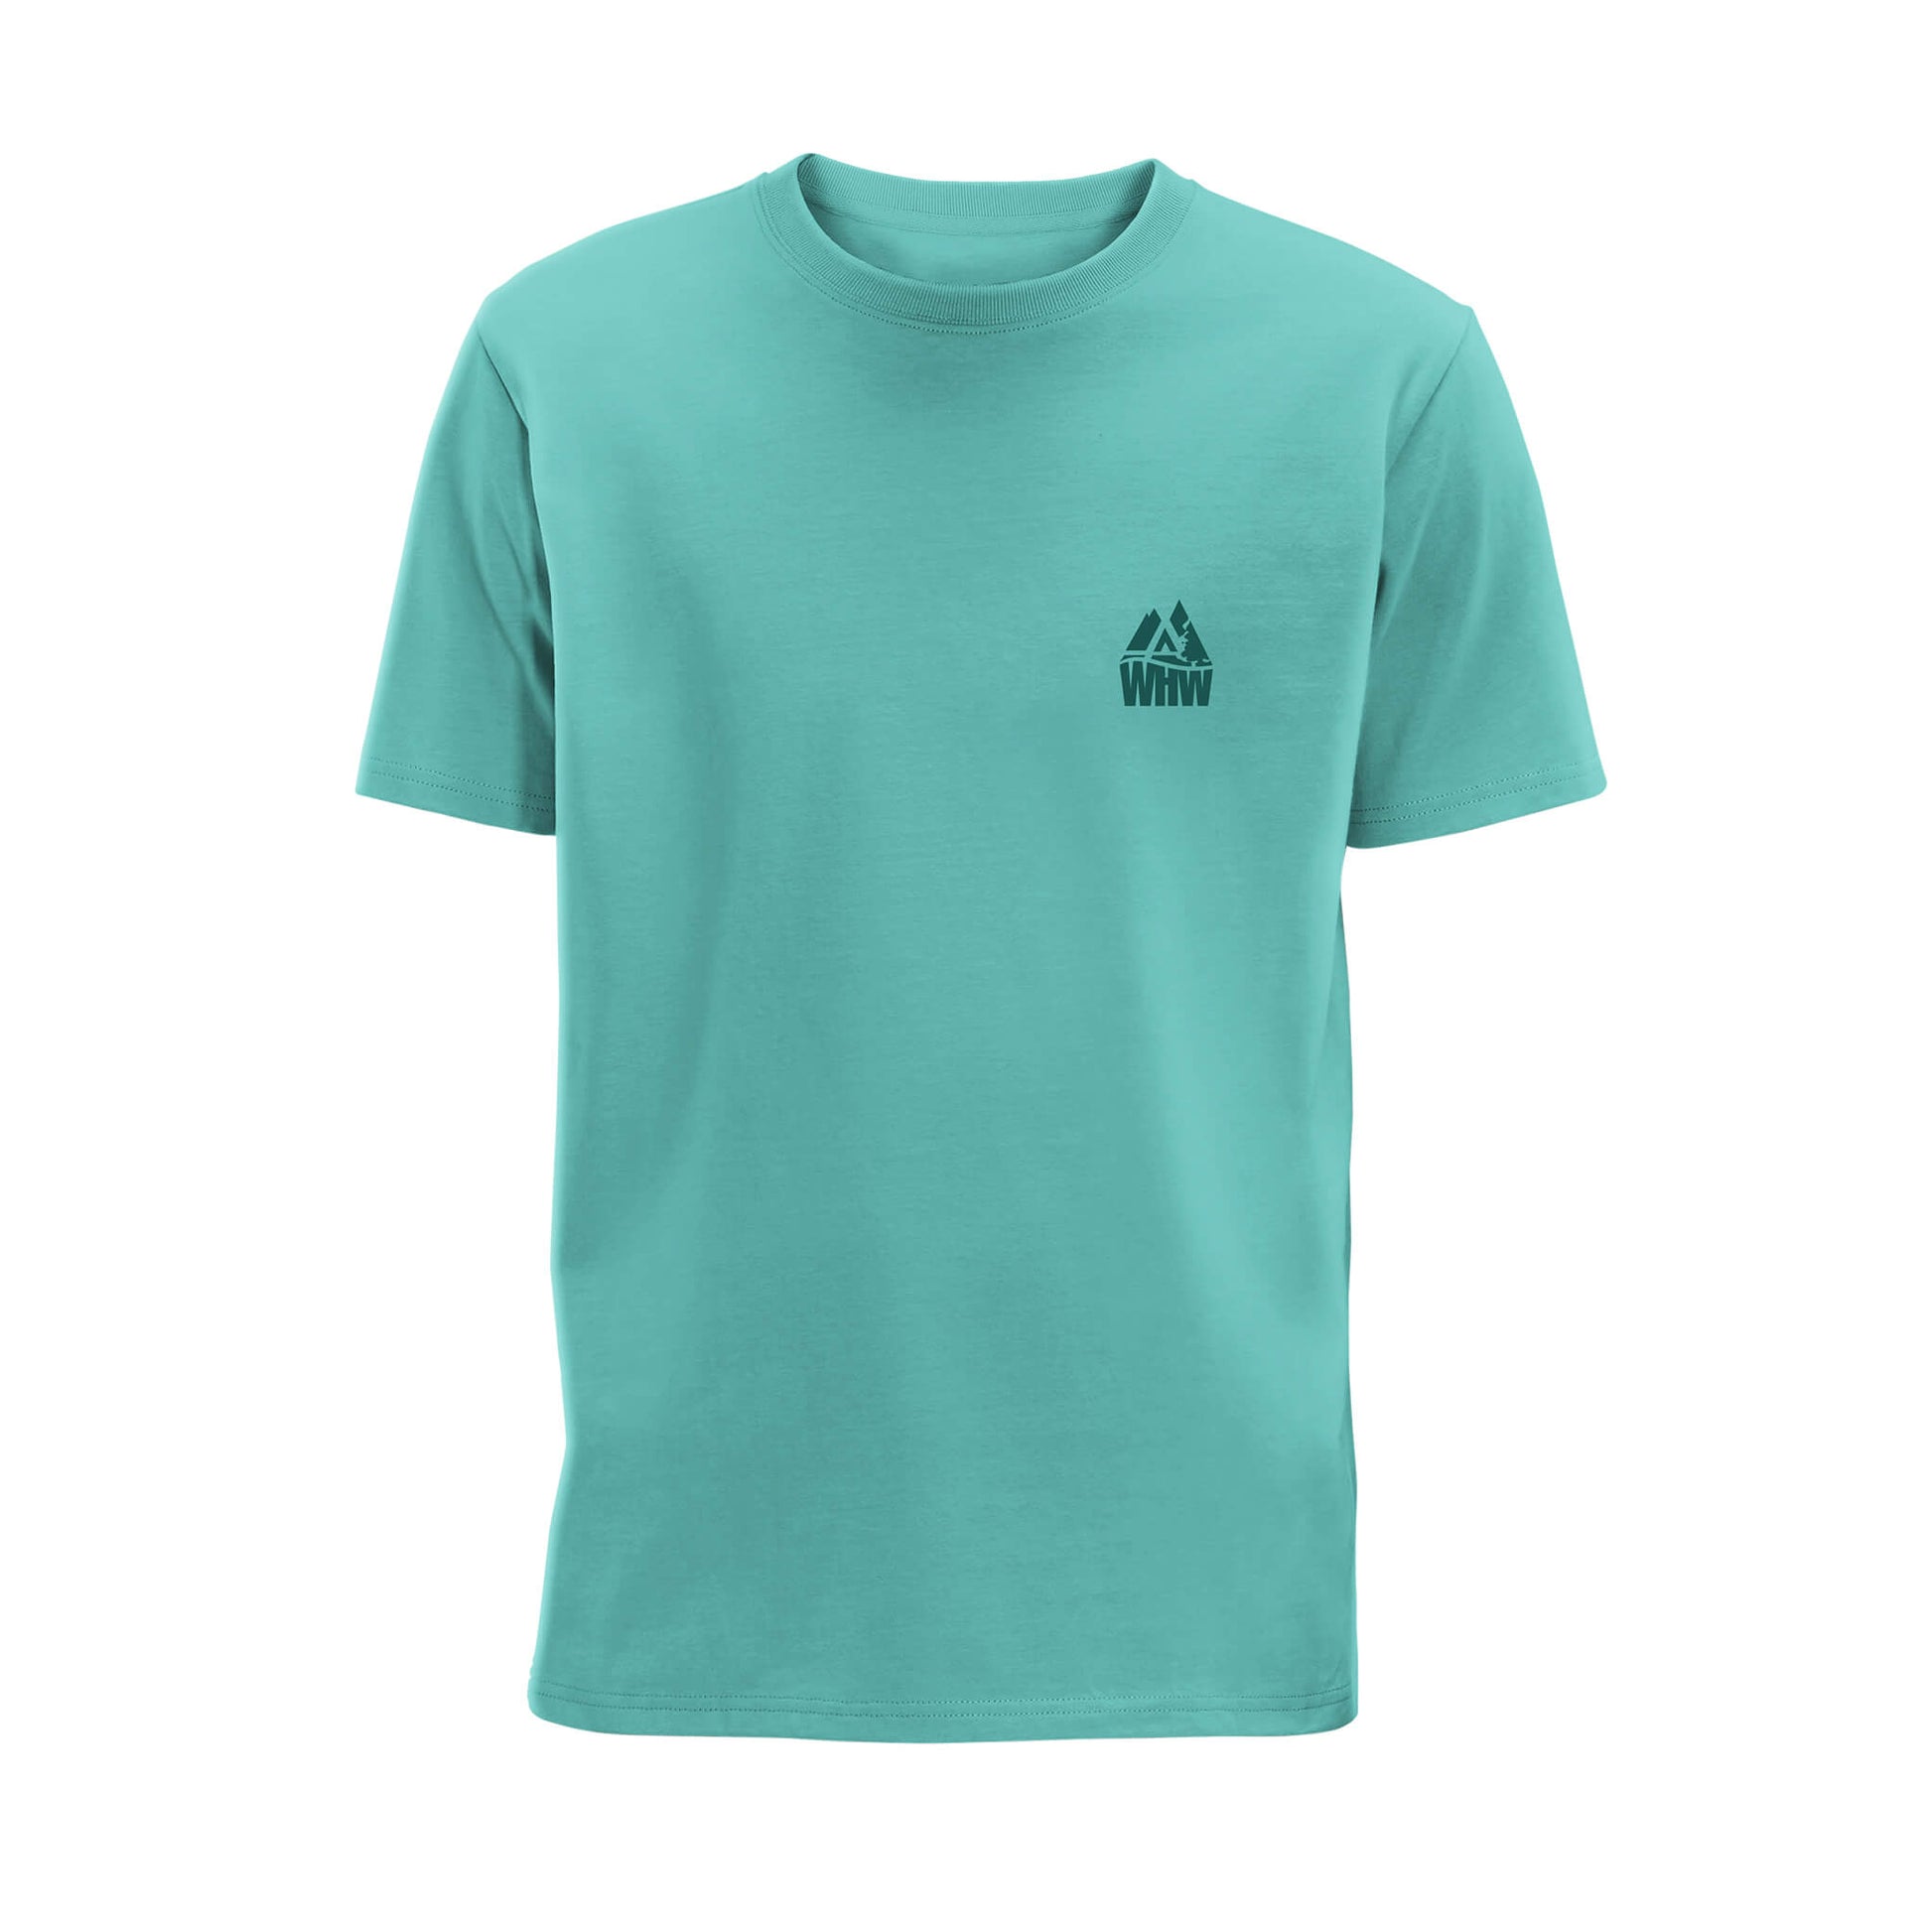 Mountain Organic Cotton T-Shirt - Teal - Front View - West Highland Way